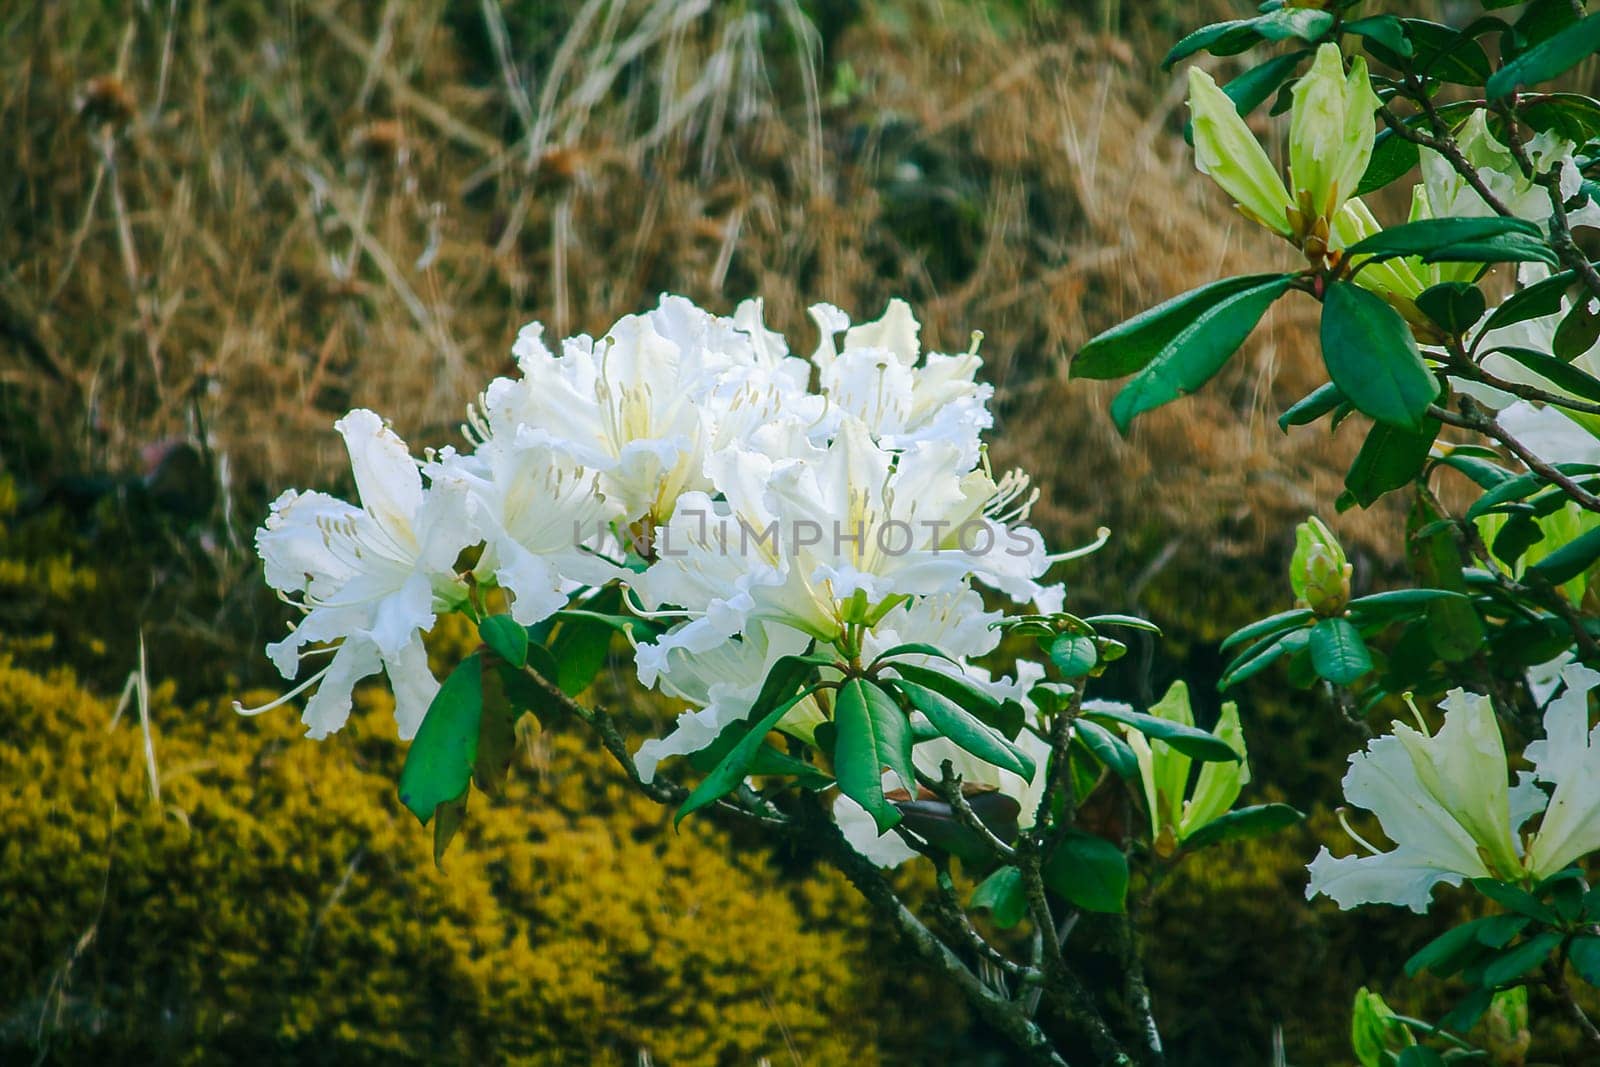 Azalea is the family name of the flowering plant in the genus Rhododendron moulmainense by Puripatt